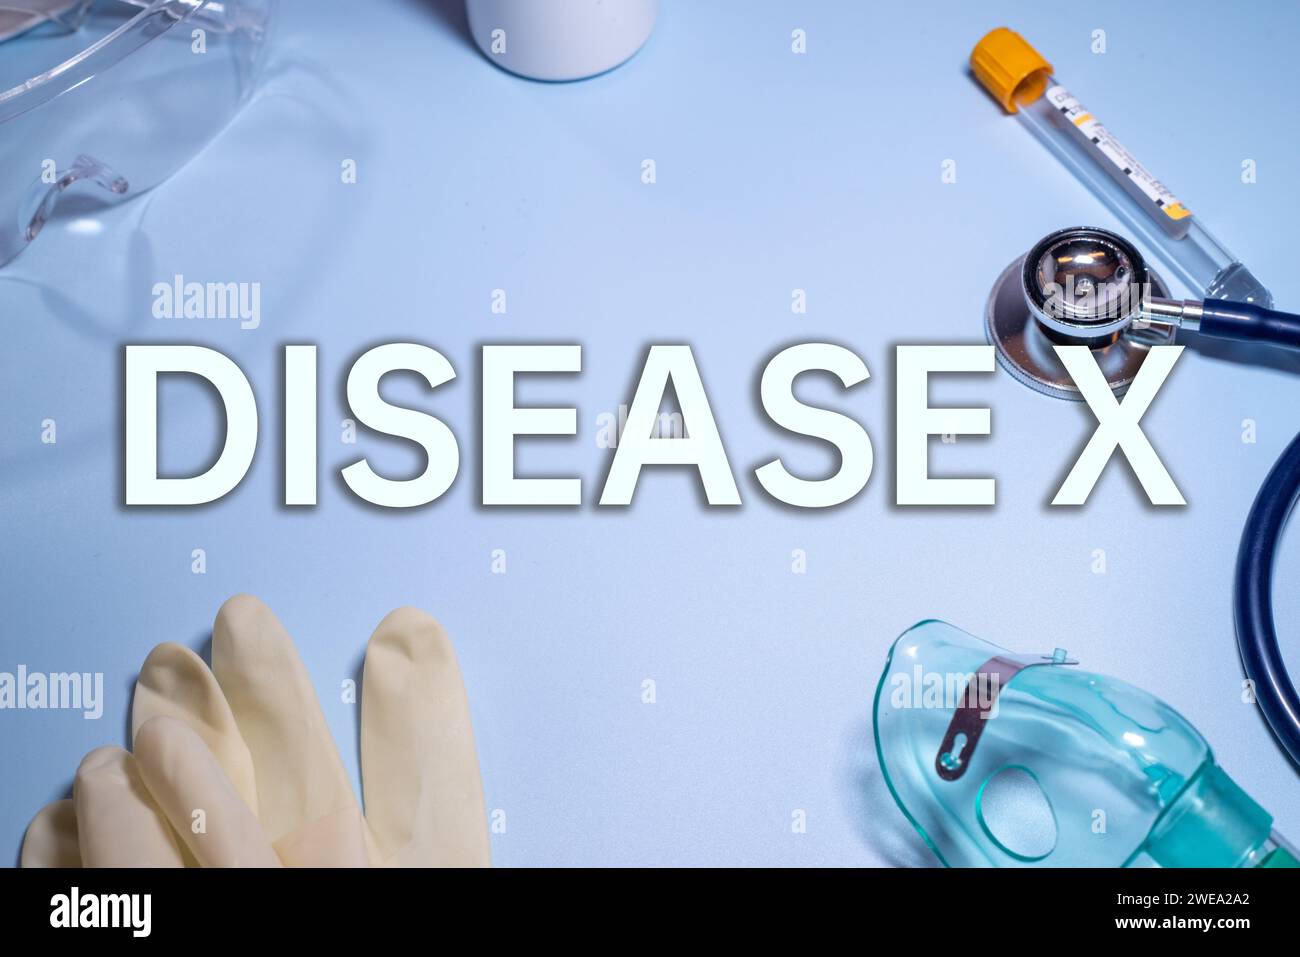 Background of Disease X.Disease X is an unknown pathogen that could cause a serious international epidemic.Medical health concept. Stock Photo